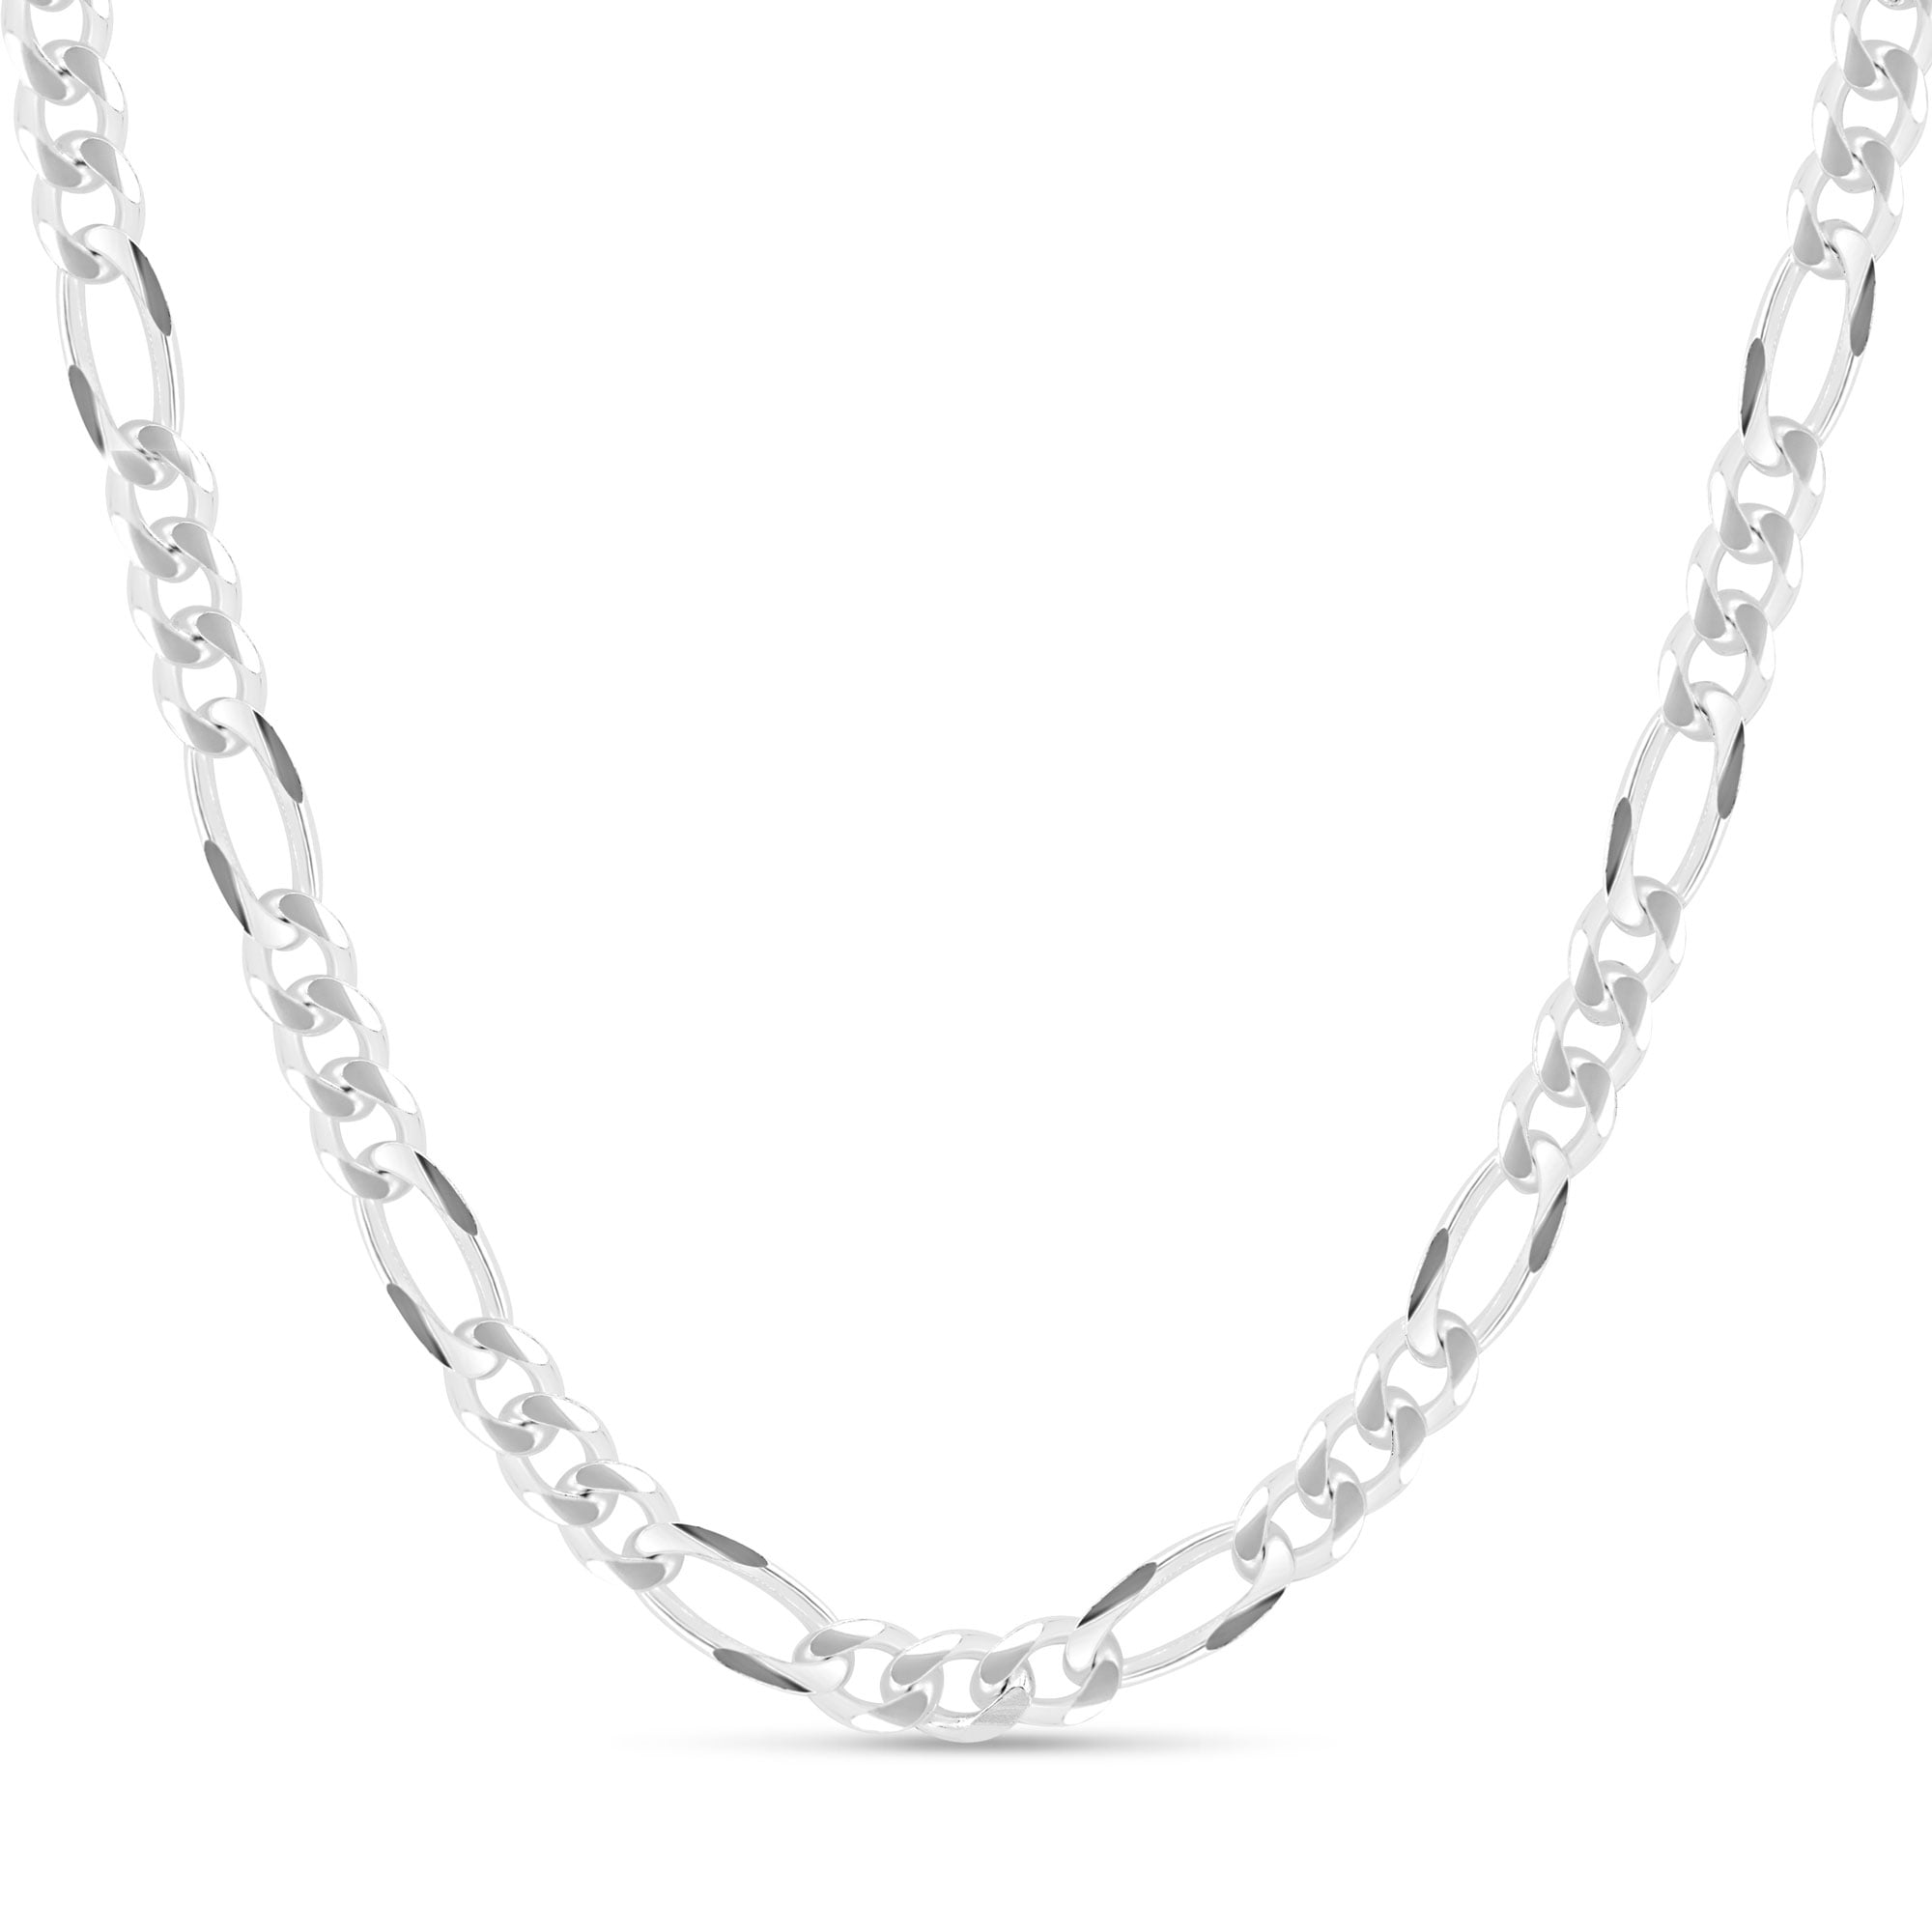 .925 Pure Silver Marina Flat 8.2 mm Round Sterling Silver Chain & Bracelets